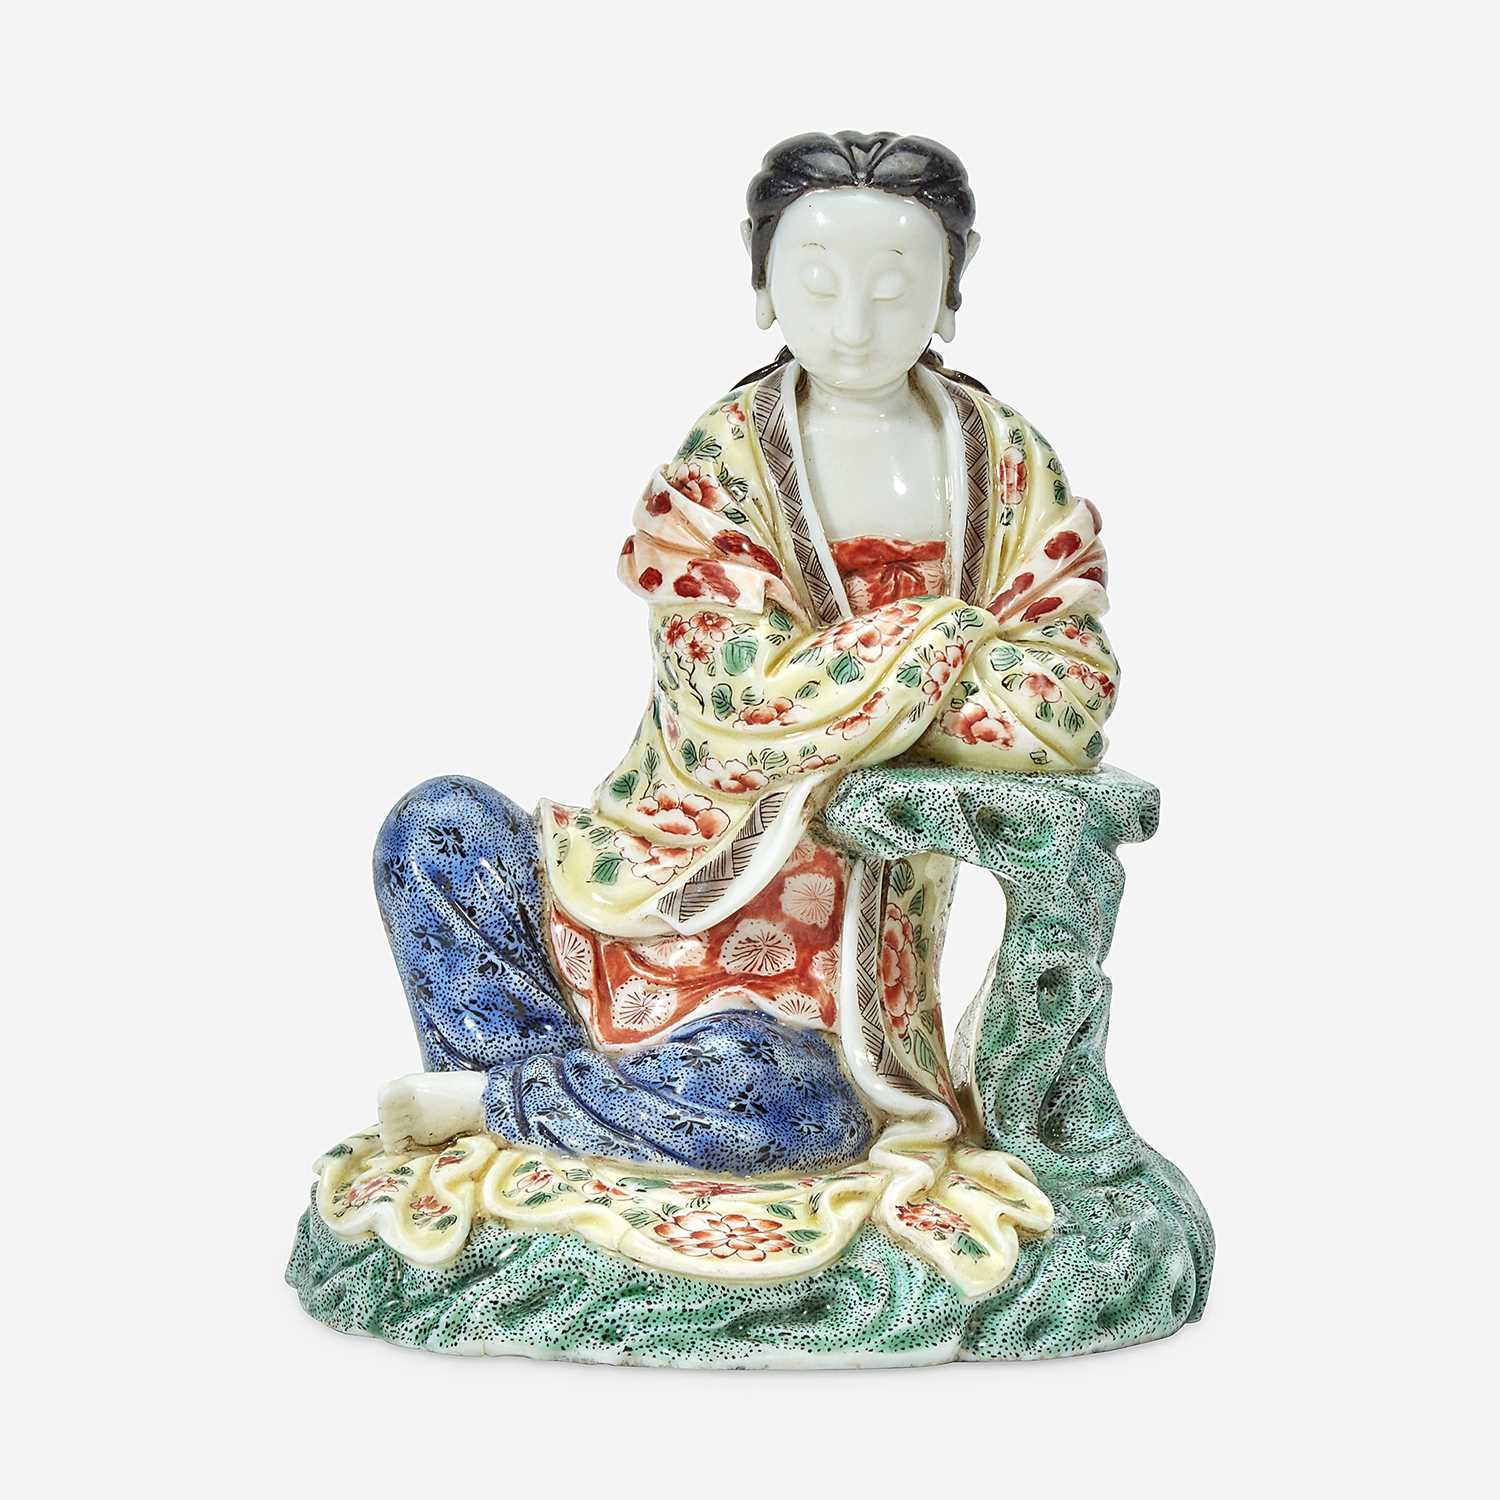 Lot 9 - A Chinese enameled Dehua porcelain figure of Guanyin seated